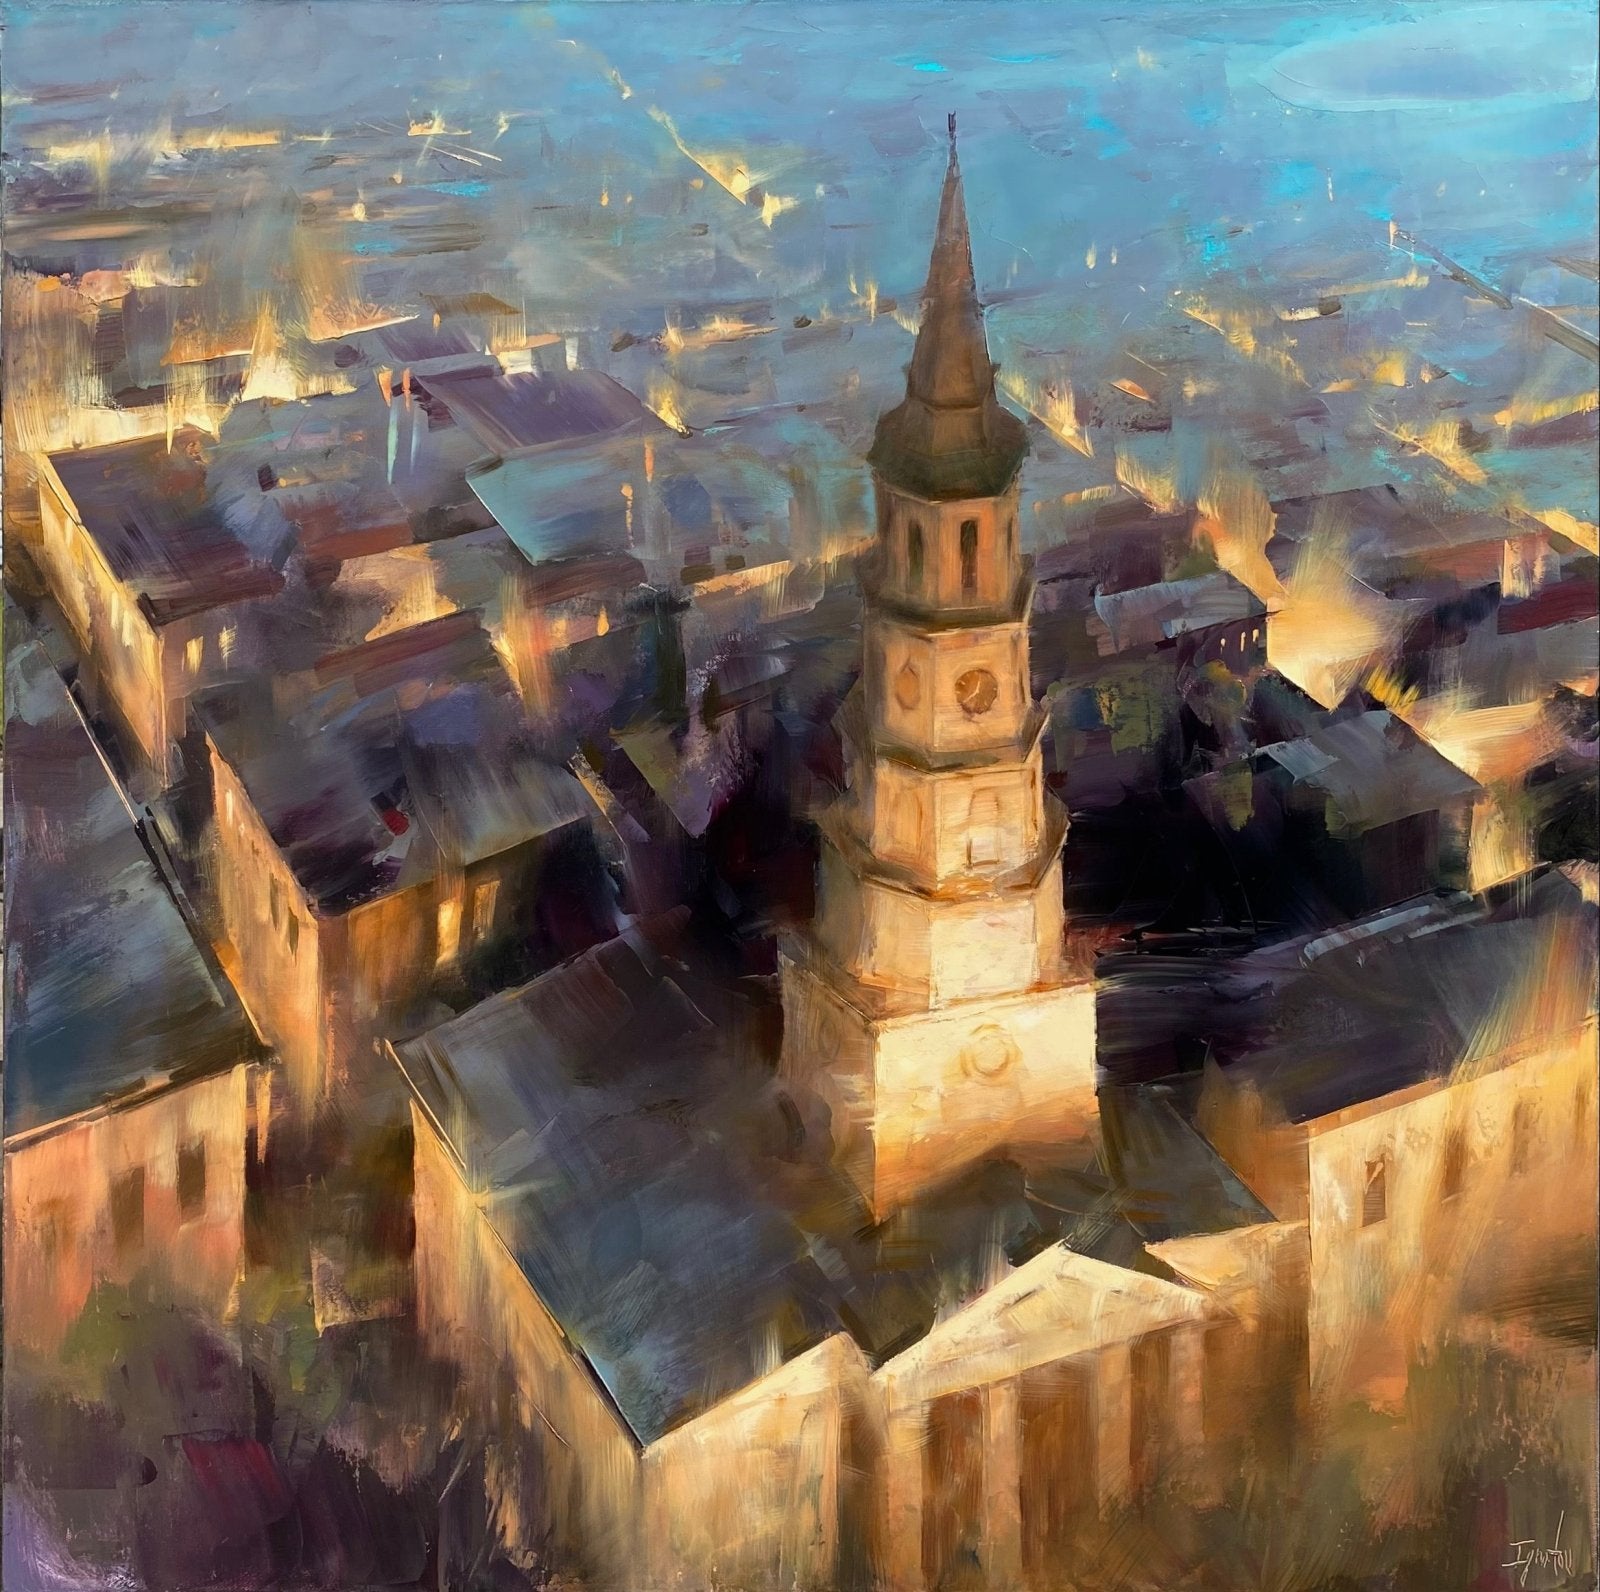 St. Phillip's Nocturne by Ignat Ignatov at LePrince Galleries